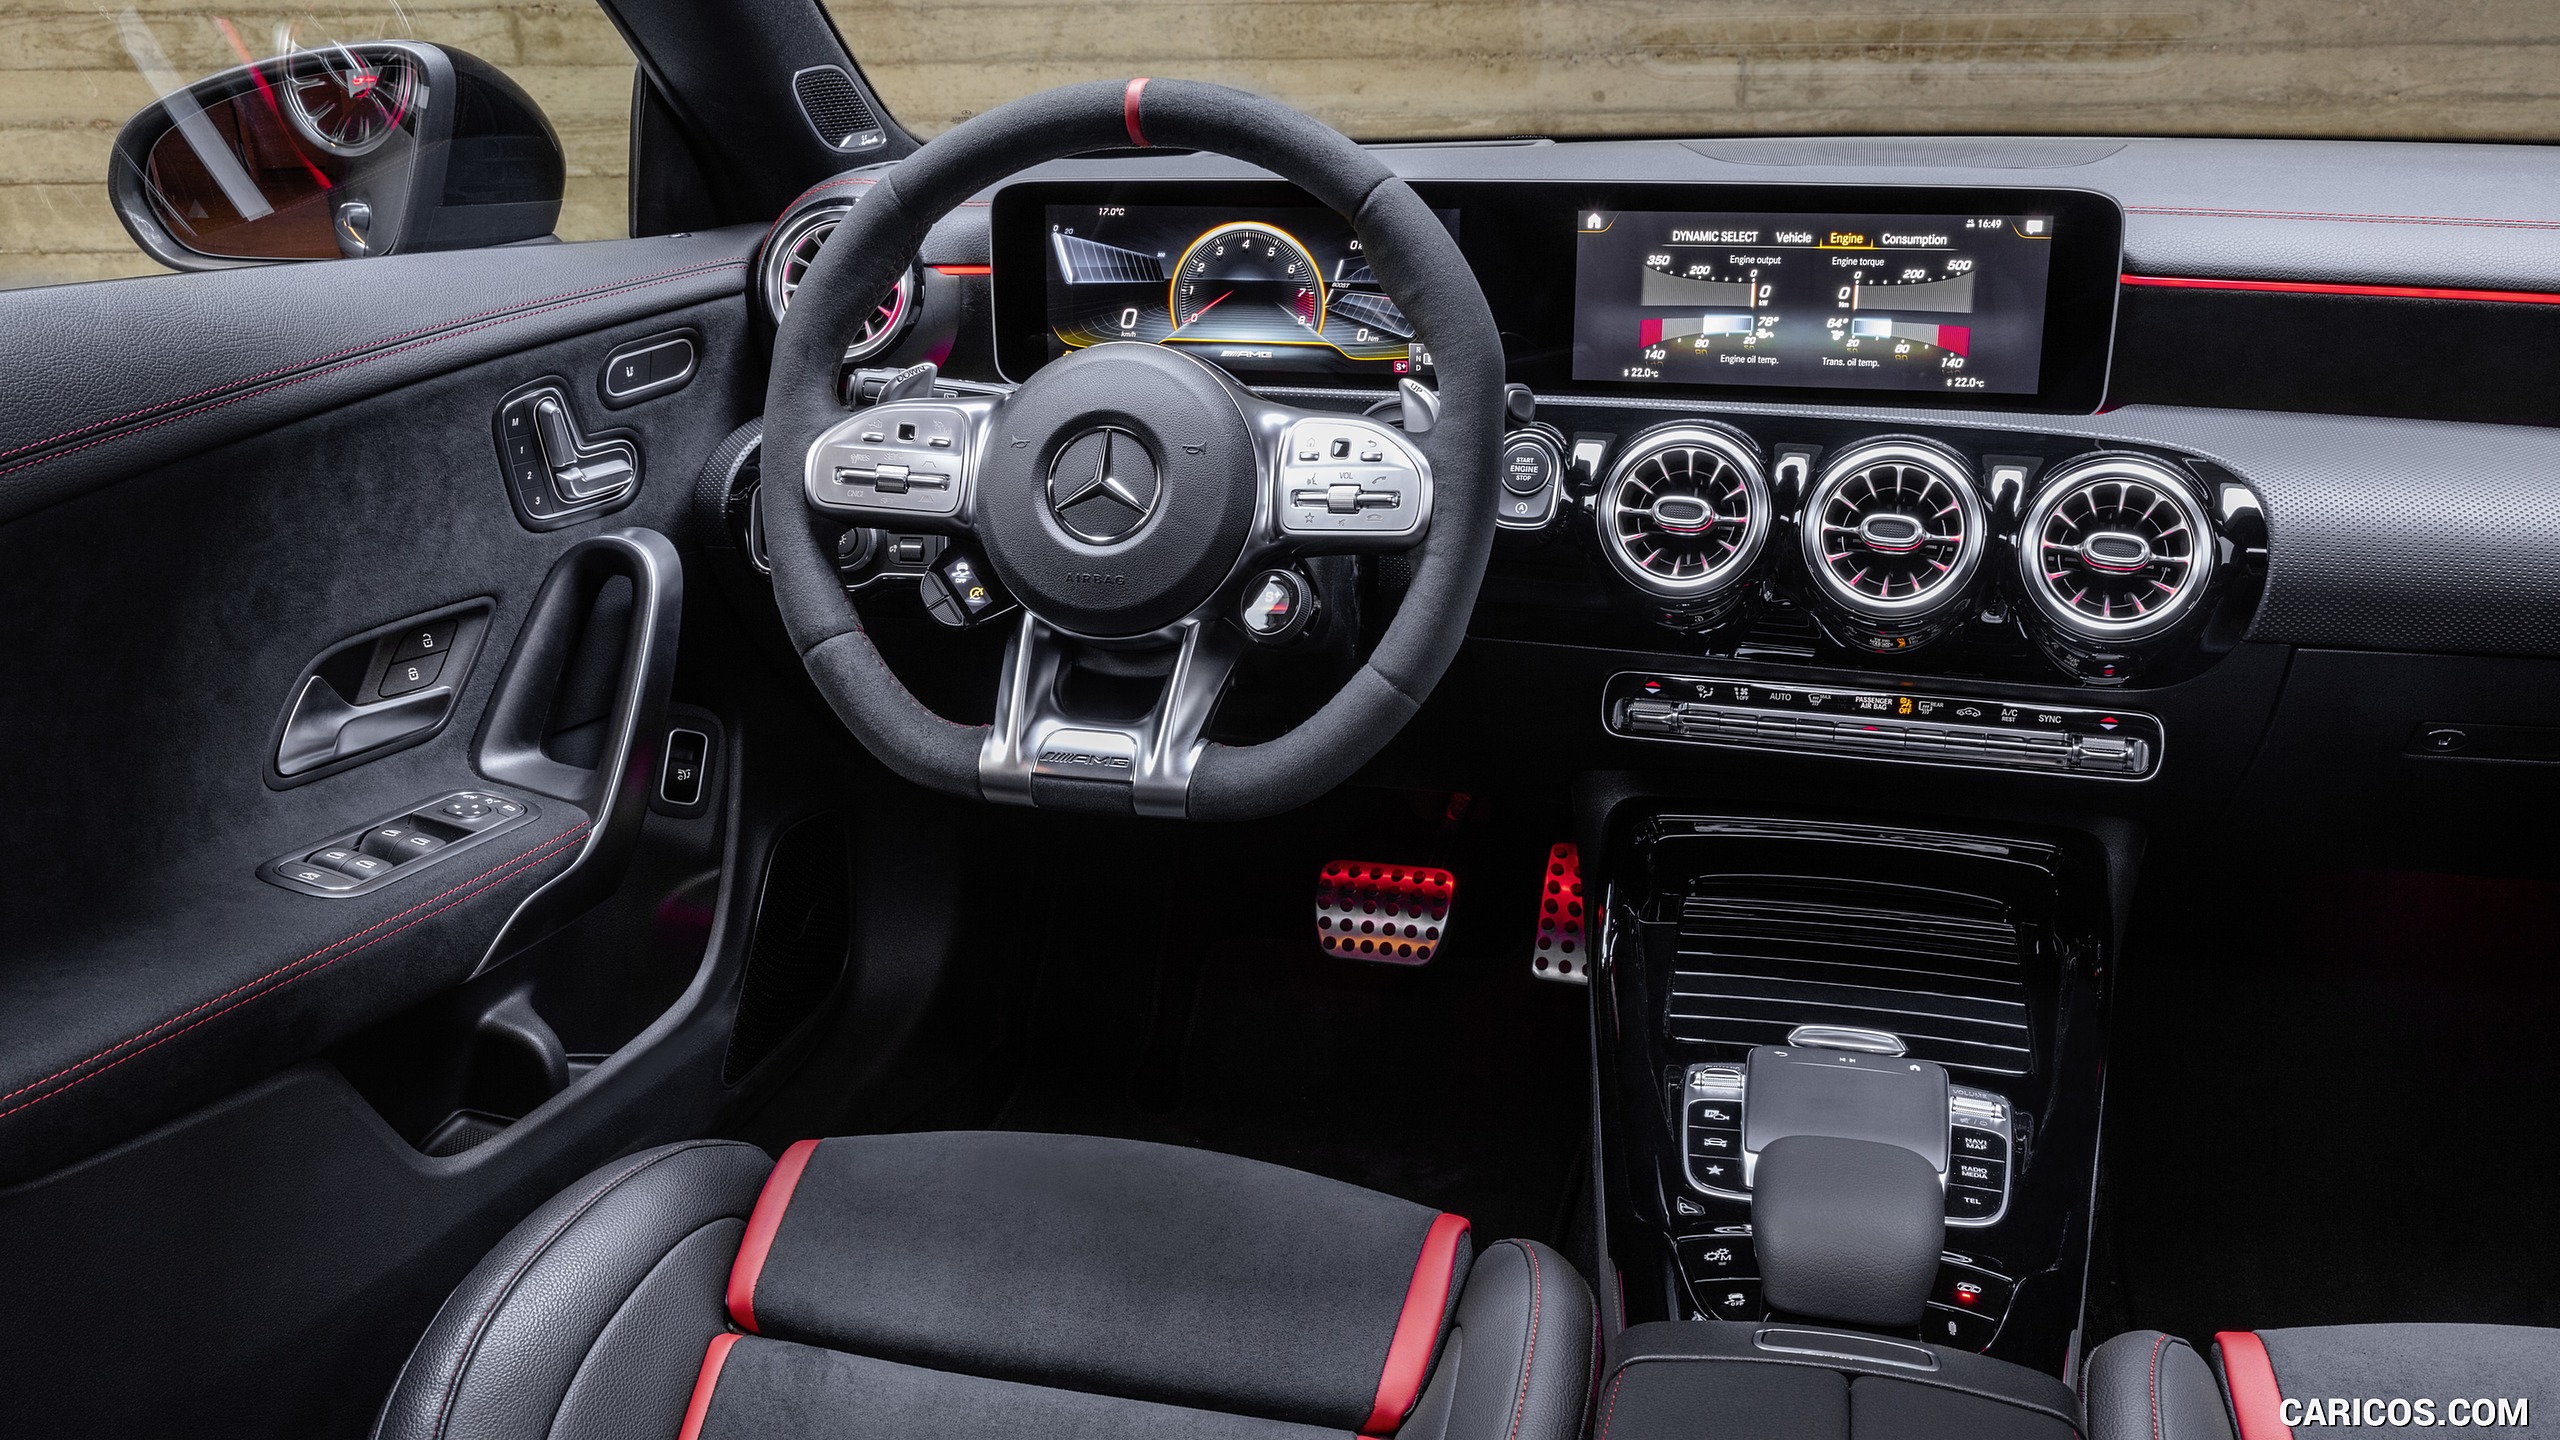 chant Indoors Symphony 2020 Mercedes-AMG CLA 45 S 4MATIC+ Shooting Brake - Interior | Caricos